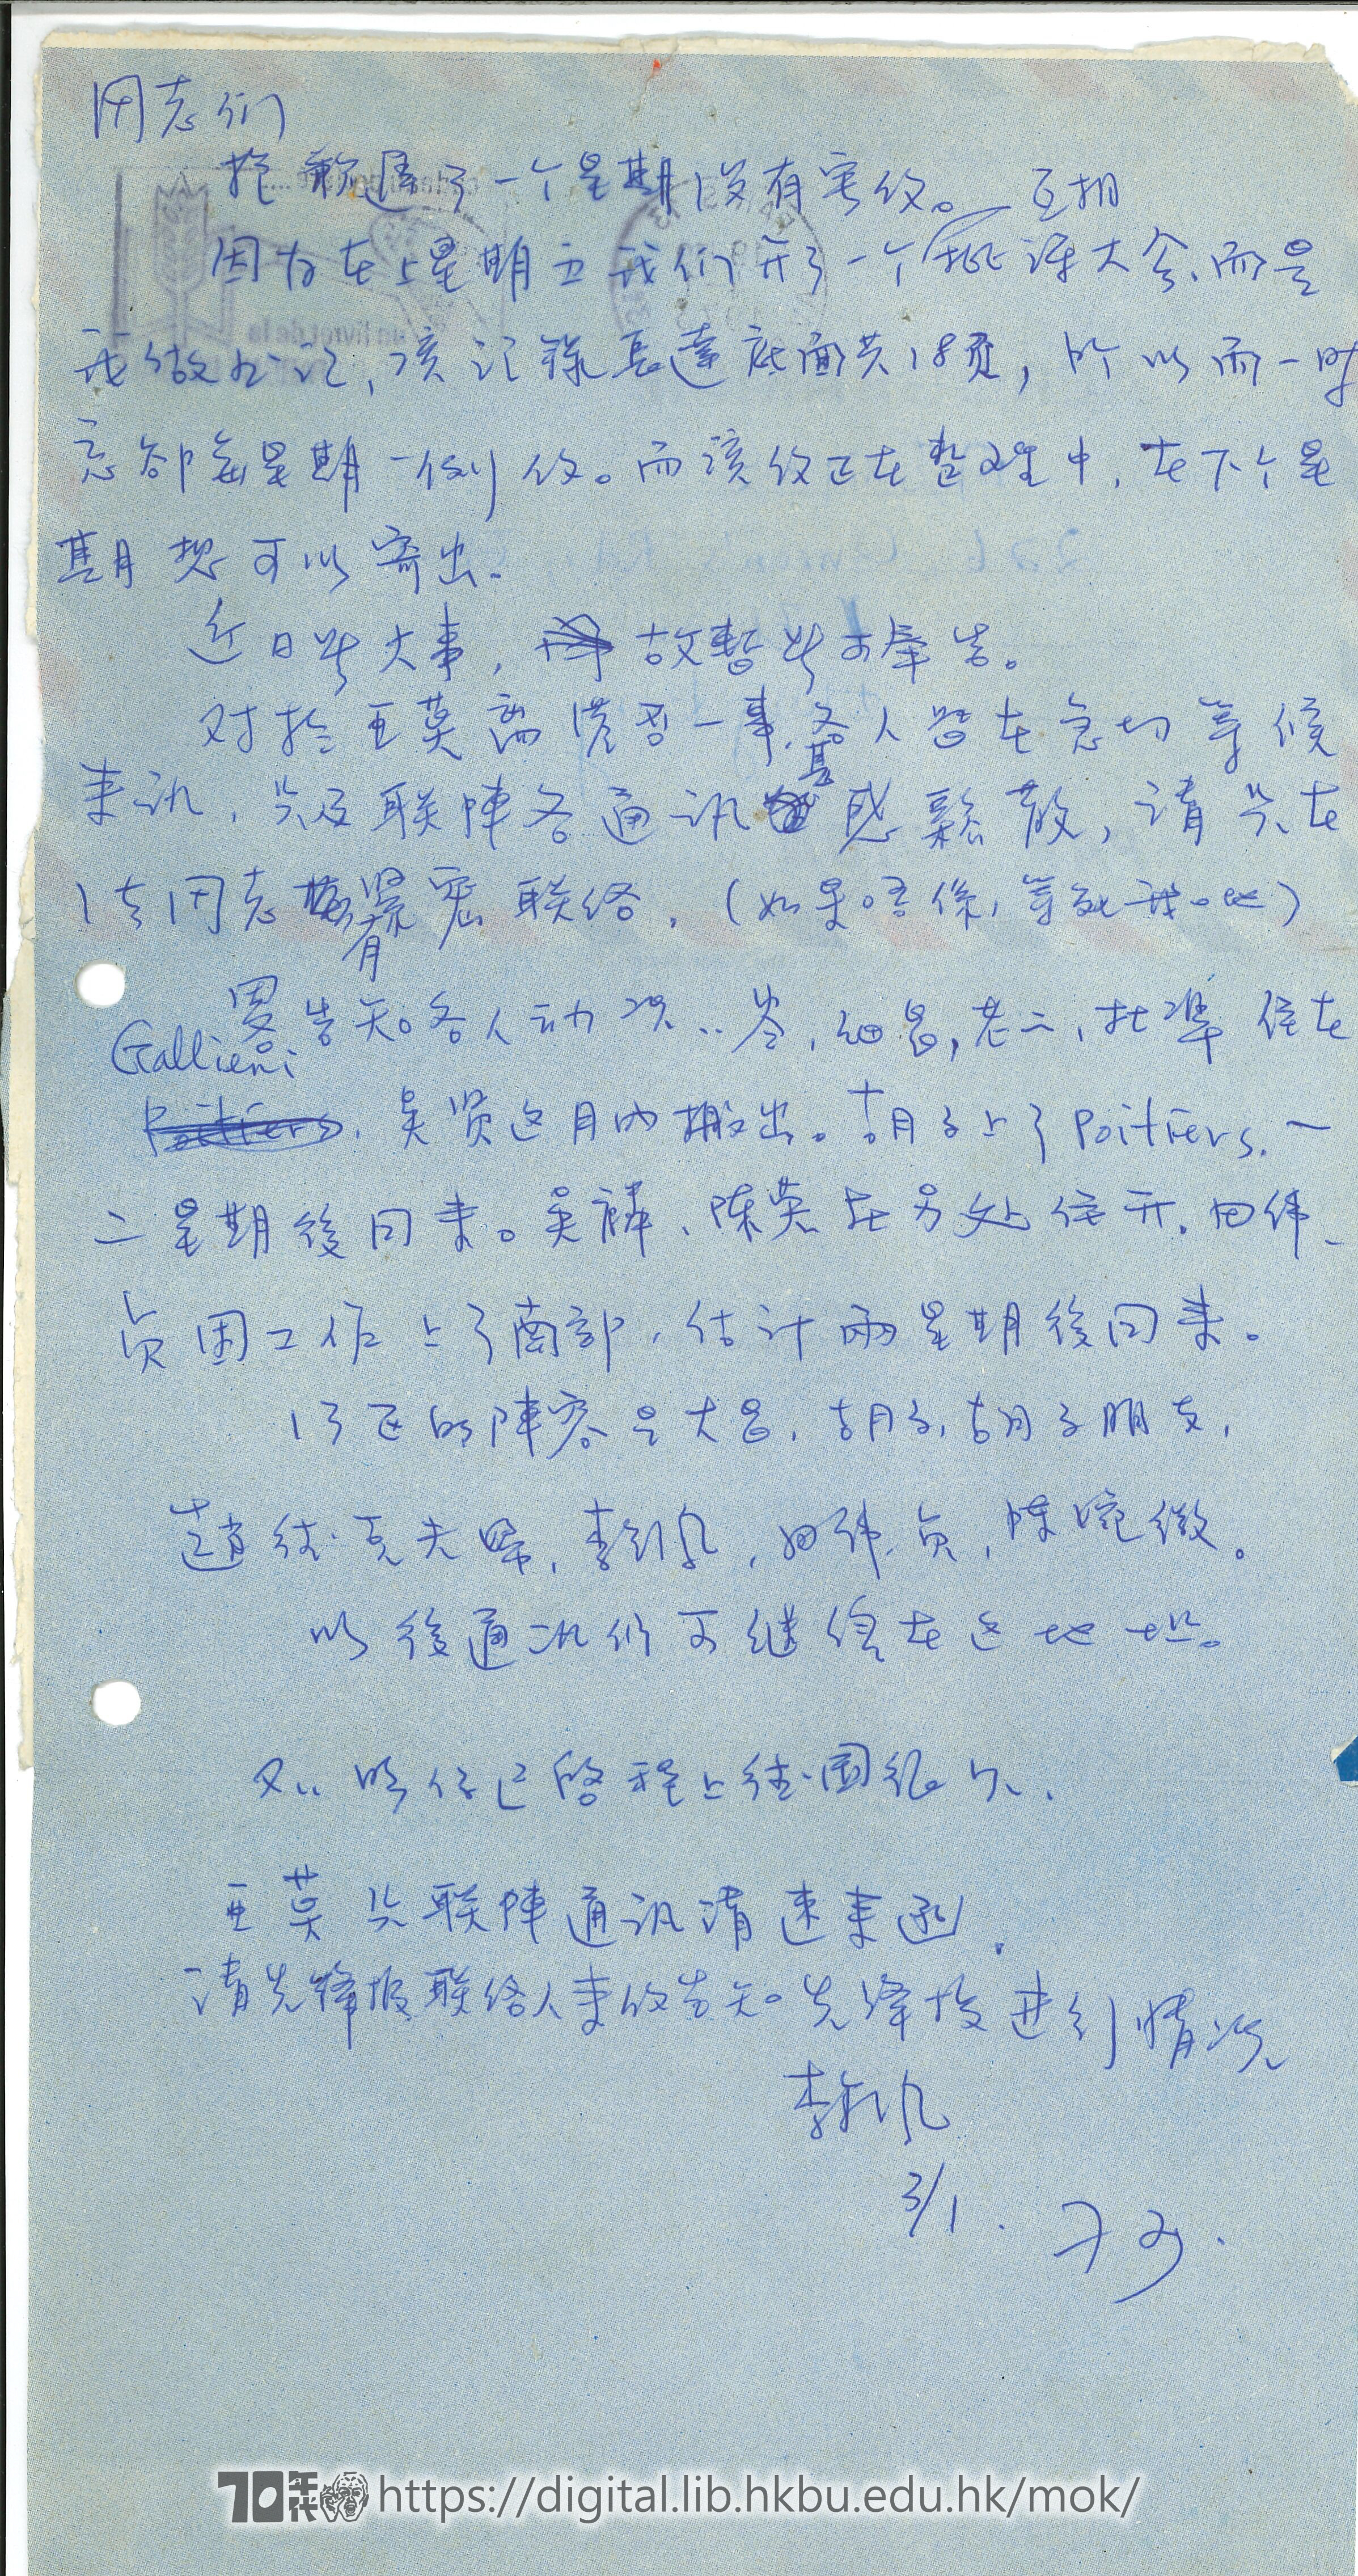   Letter from Lee Kam-fung Li 